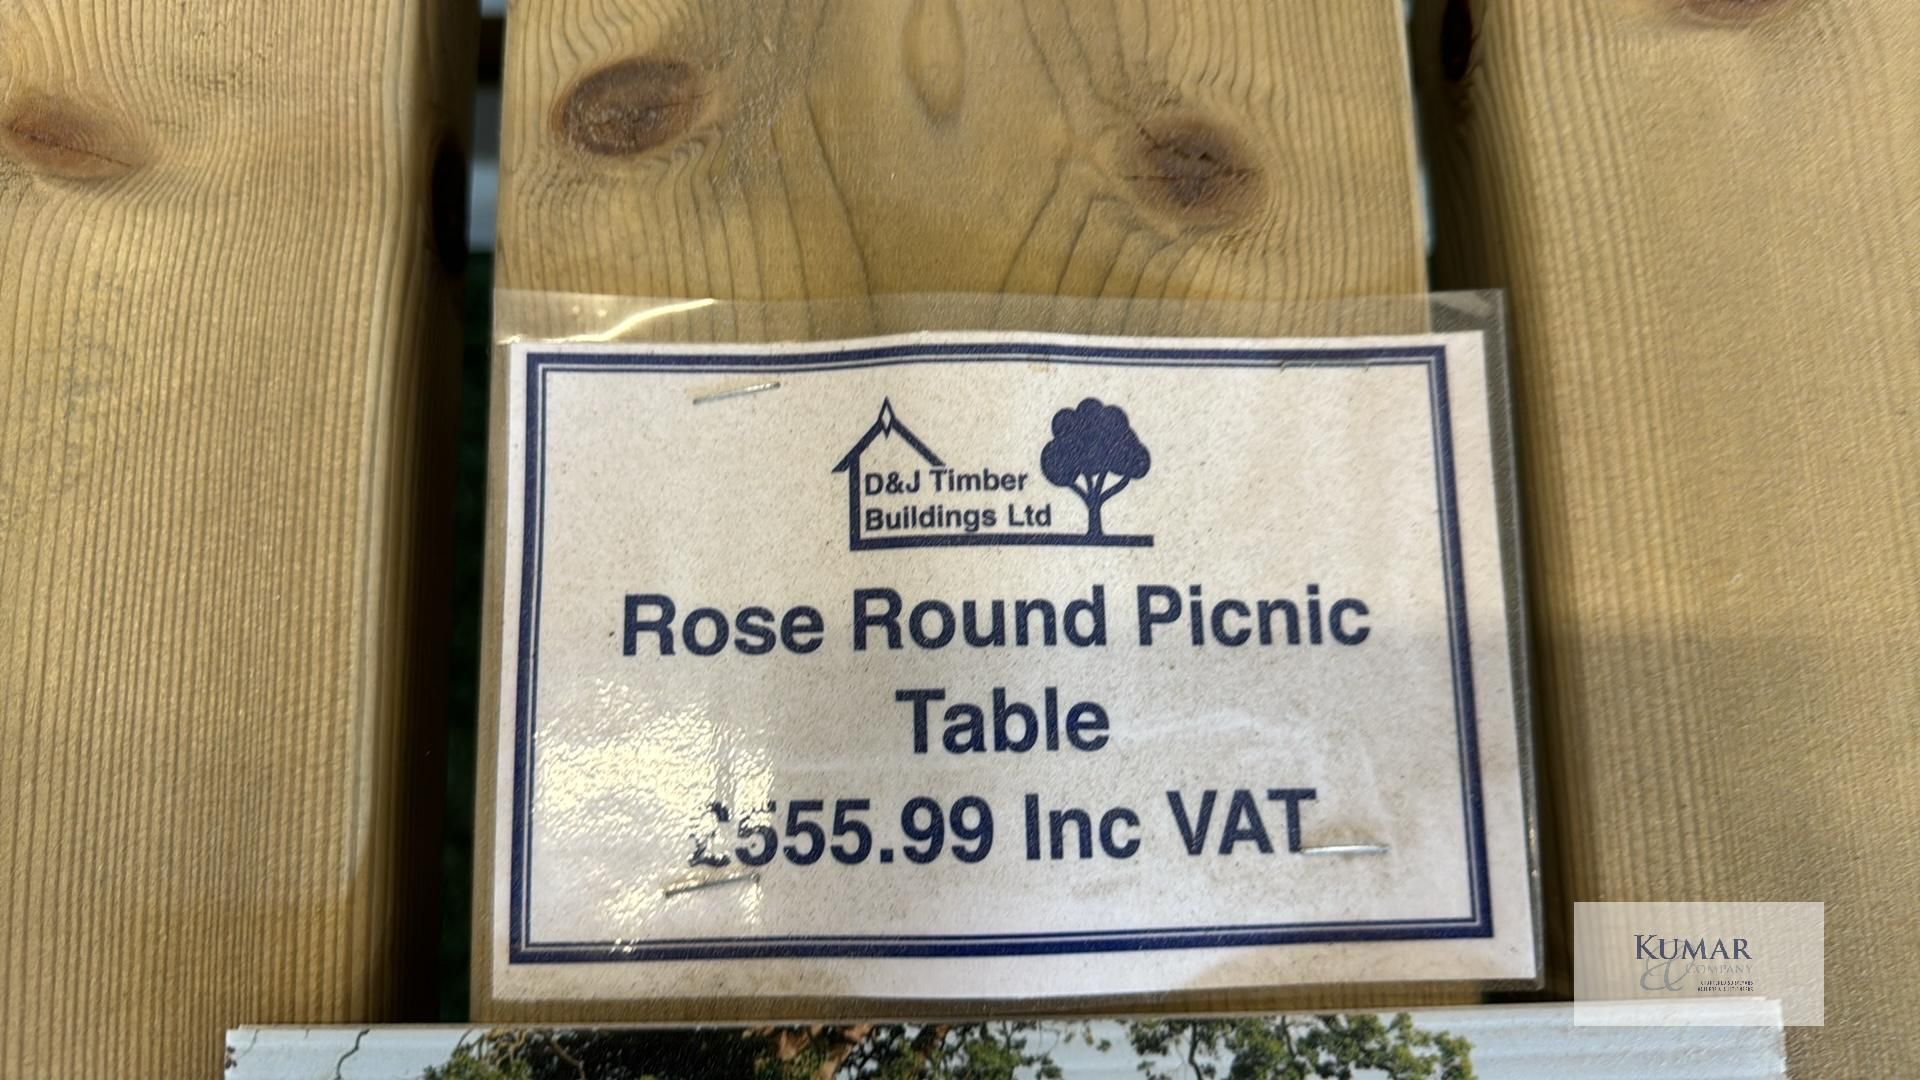 Rose Round Picnic Table w2.10m x h 2.23m, RRP £555.99 - Image 5 of 8